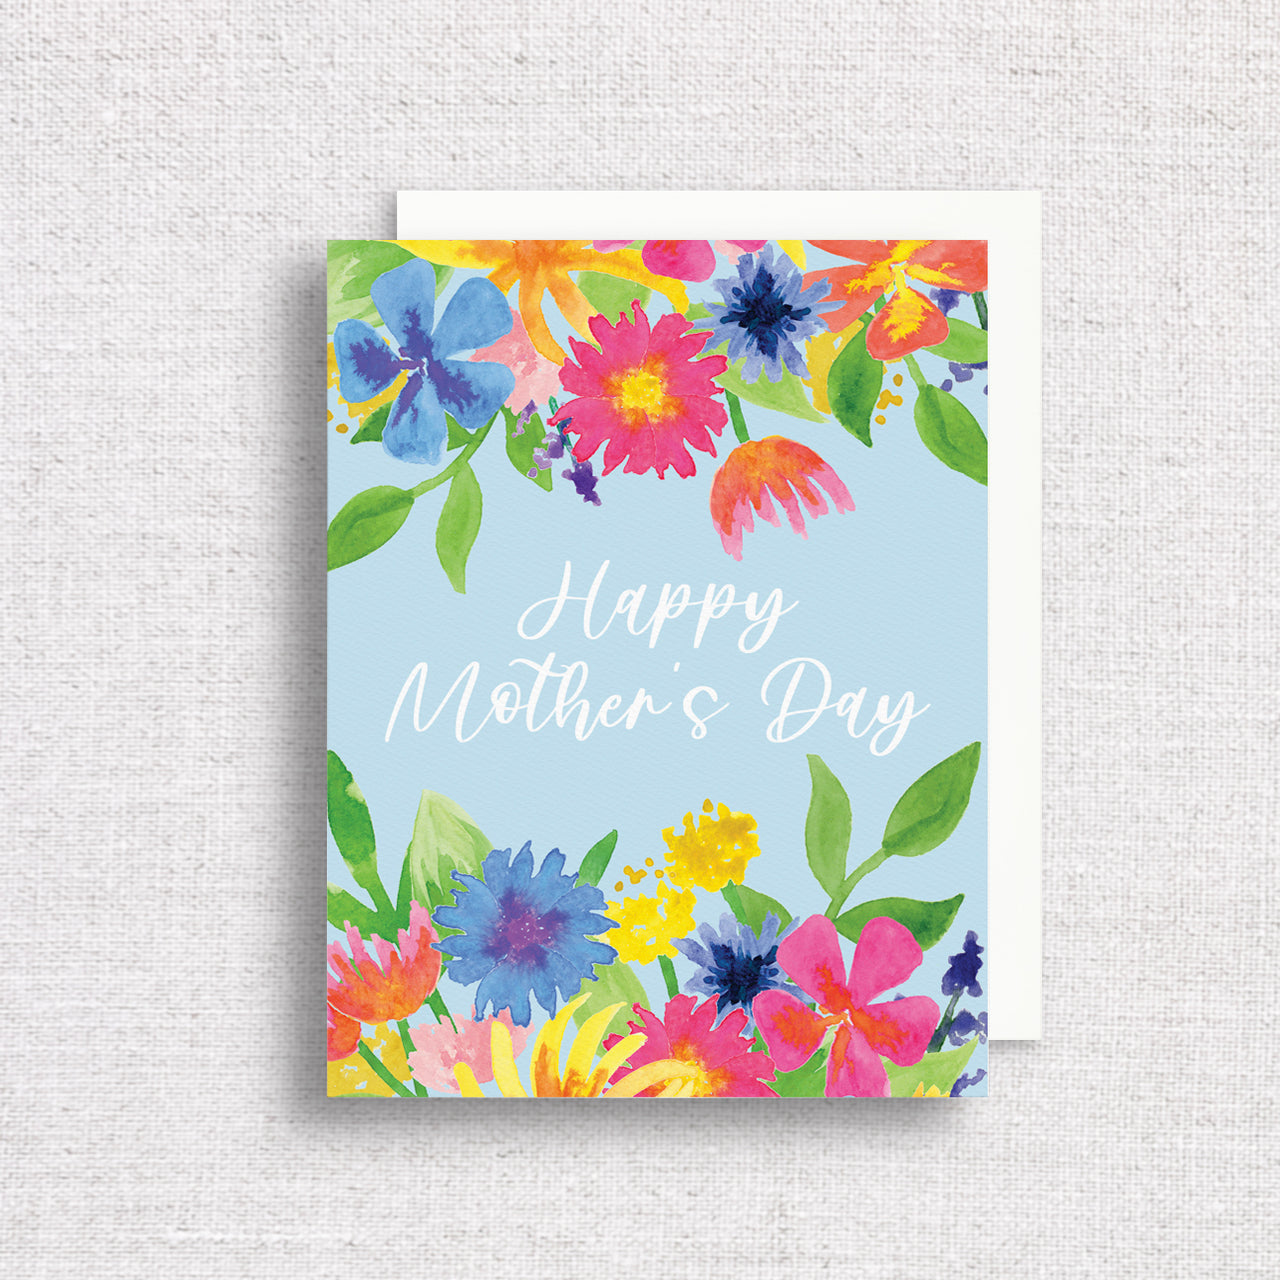 Mother's Day Wildflowers Greeting Card by Gert & Co